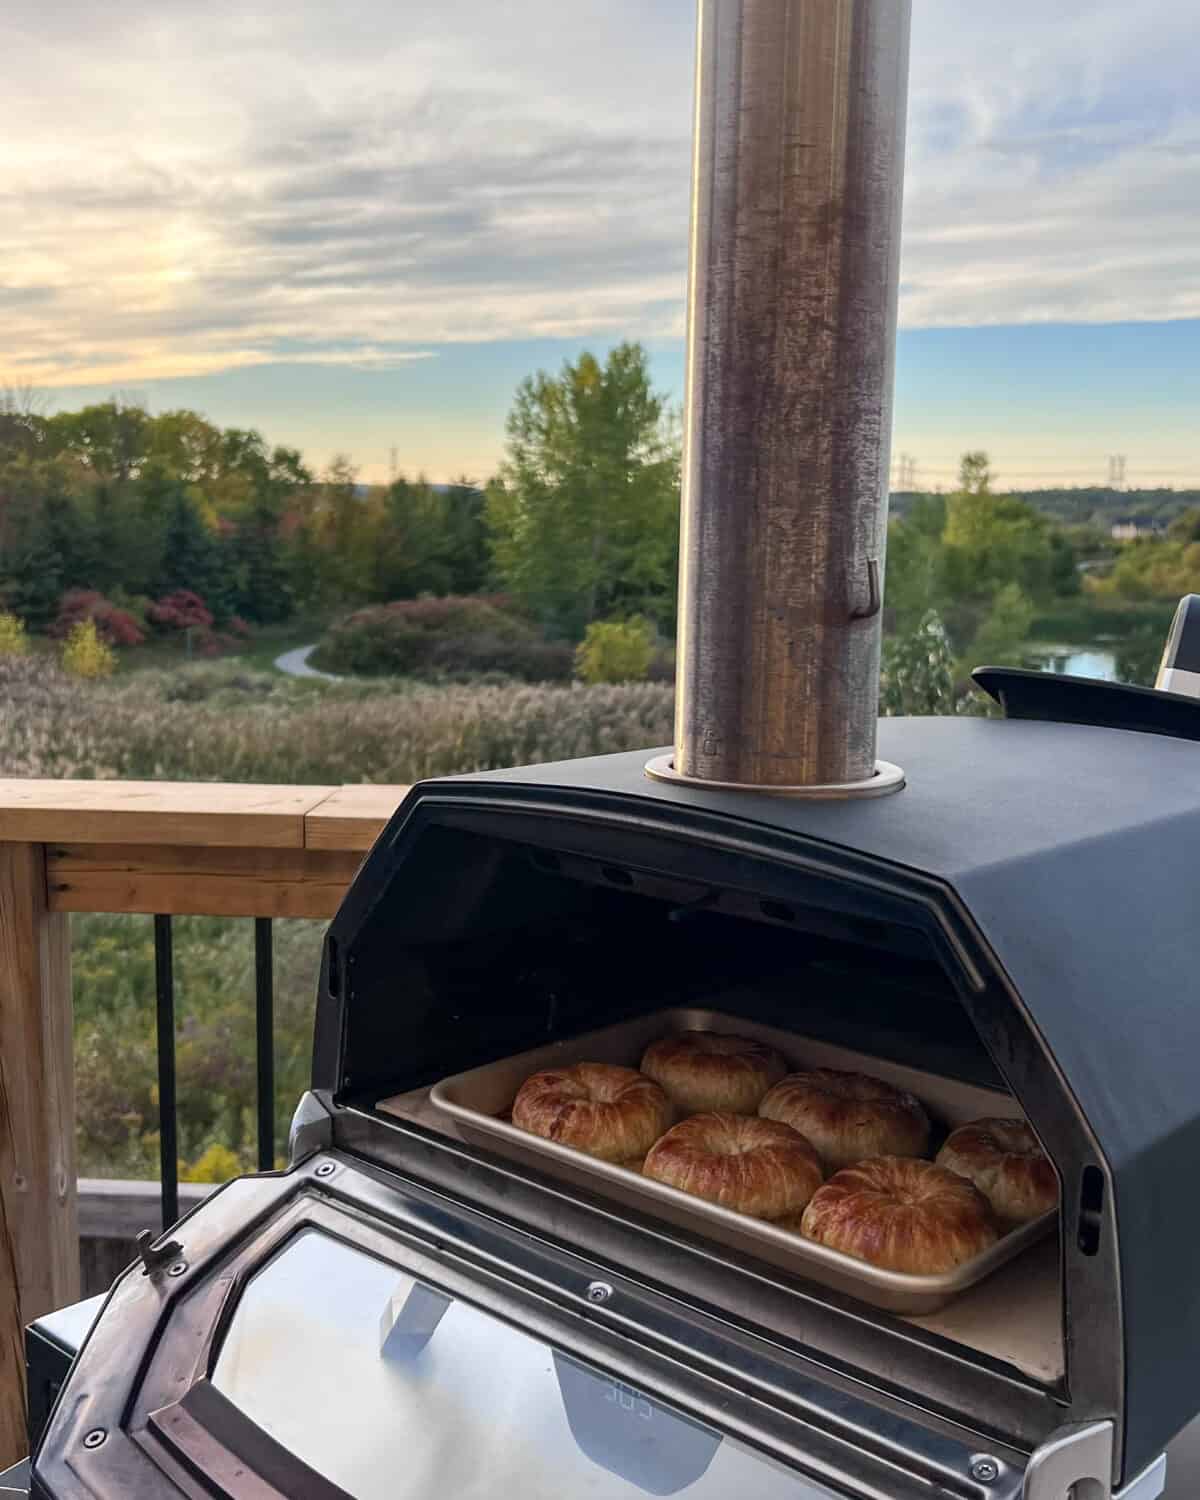 A pan of 6 Savoury Apple-Brie Hand Pies in an Ooni oven with a sunset and trees in the background.